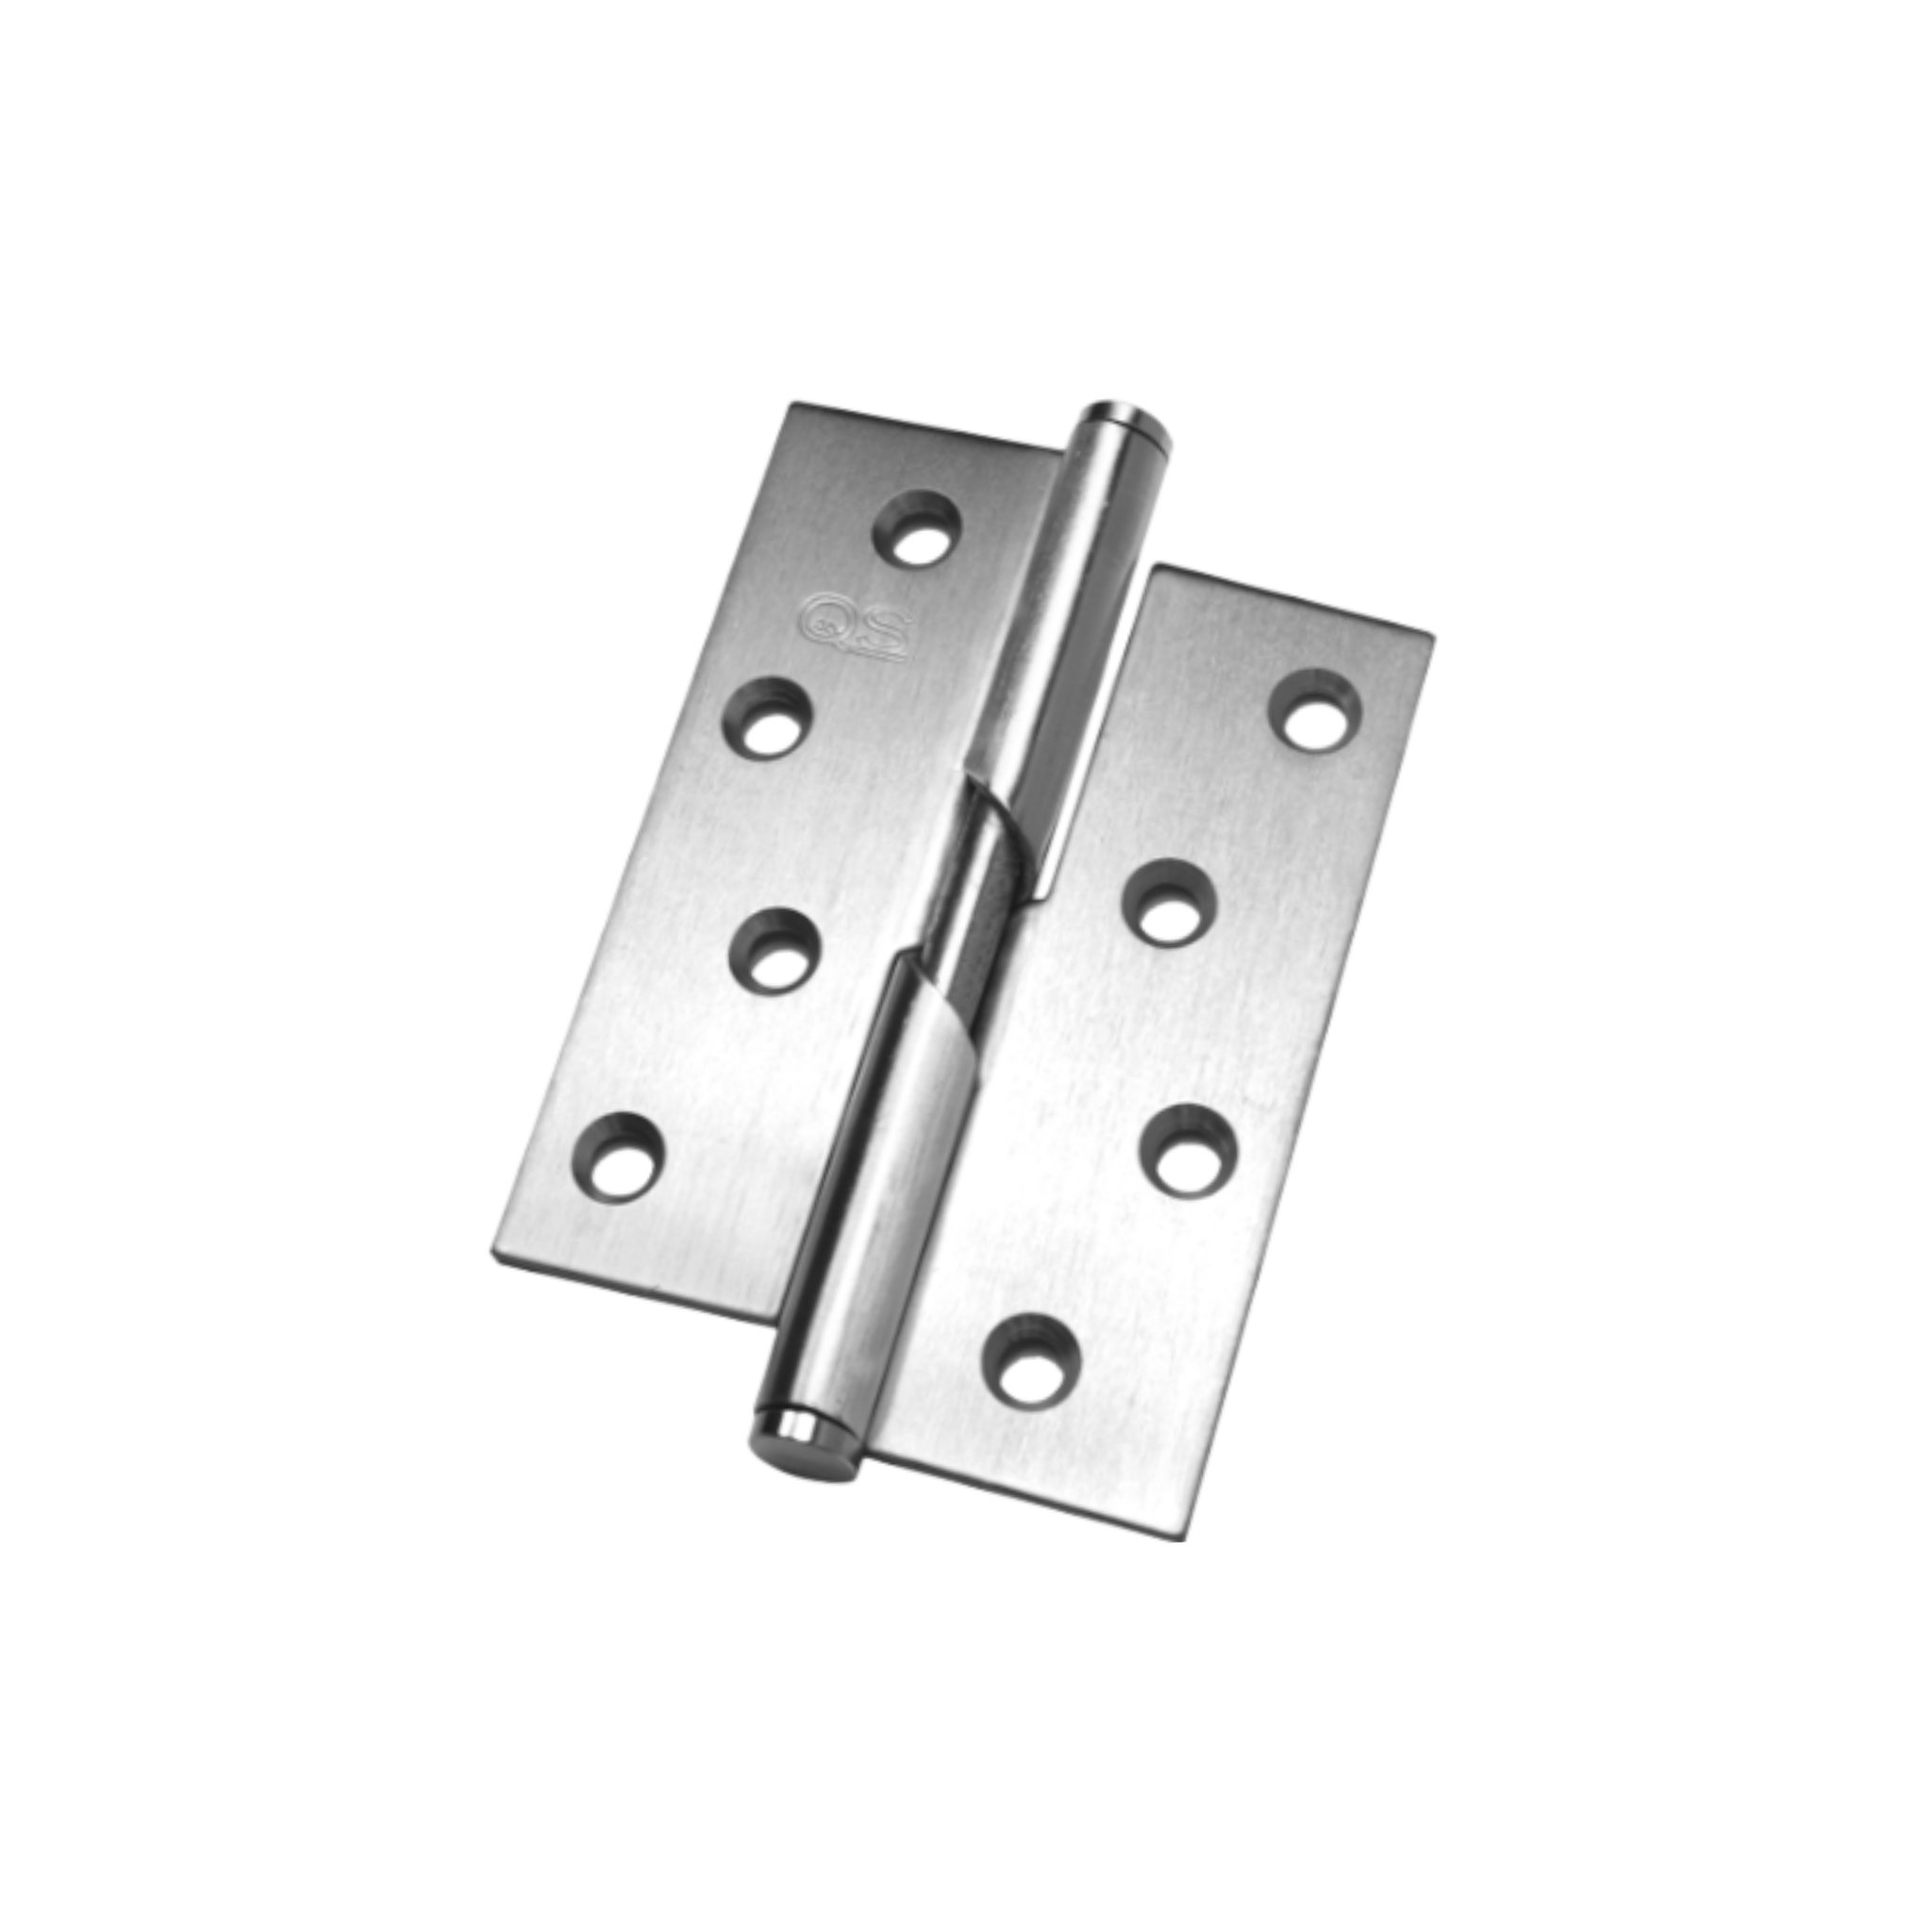 QS4440 LH, Rising Hinge, Left Hand, 2 x Hinges (1 Pair), 100mm (h) x 76mm (w) x 2mm (t), Stainless Steel, QS